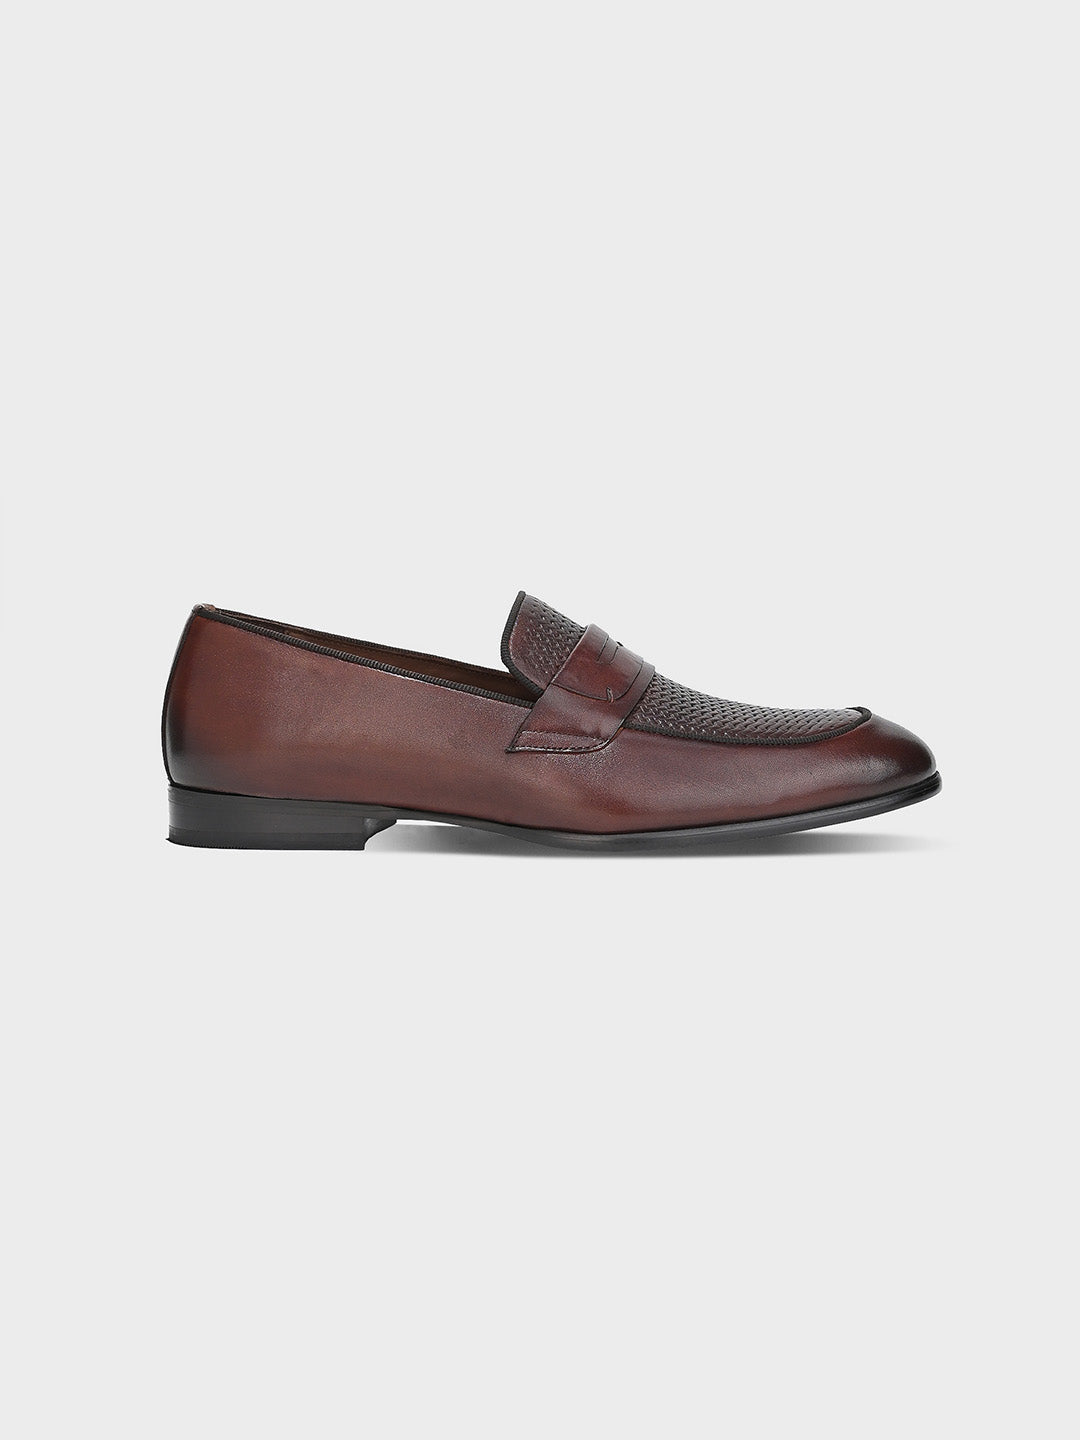 Classic Brown Leather Men's Slip-On Loafer Shoes